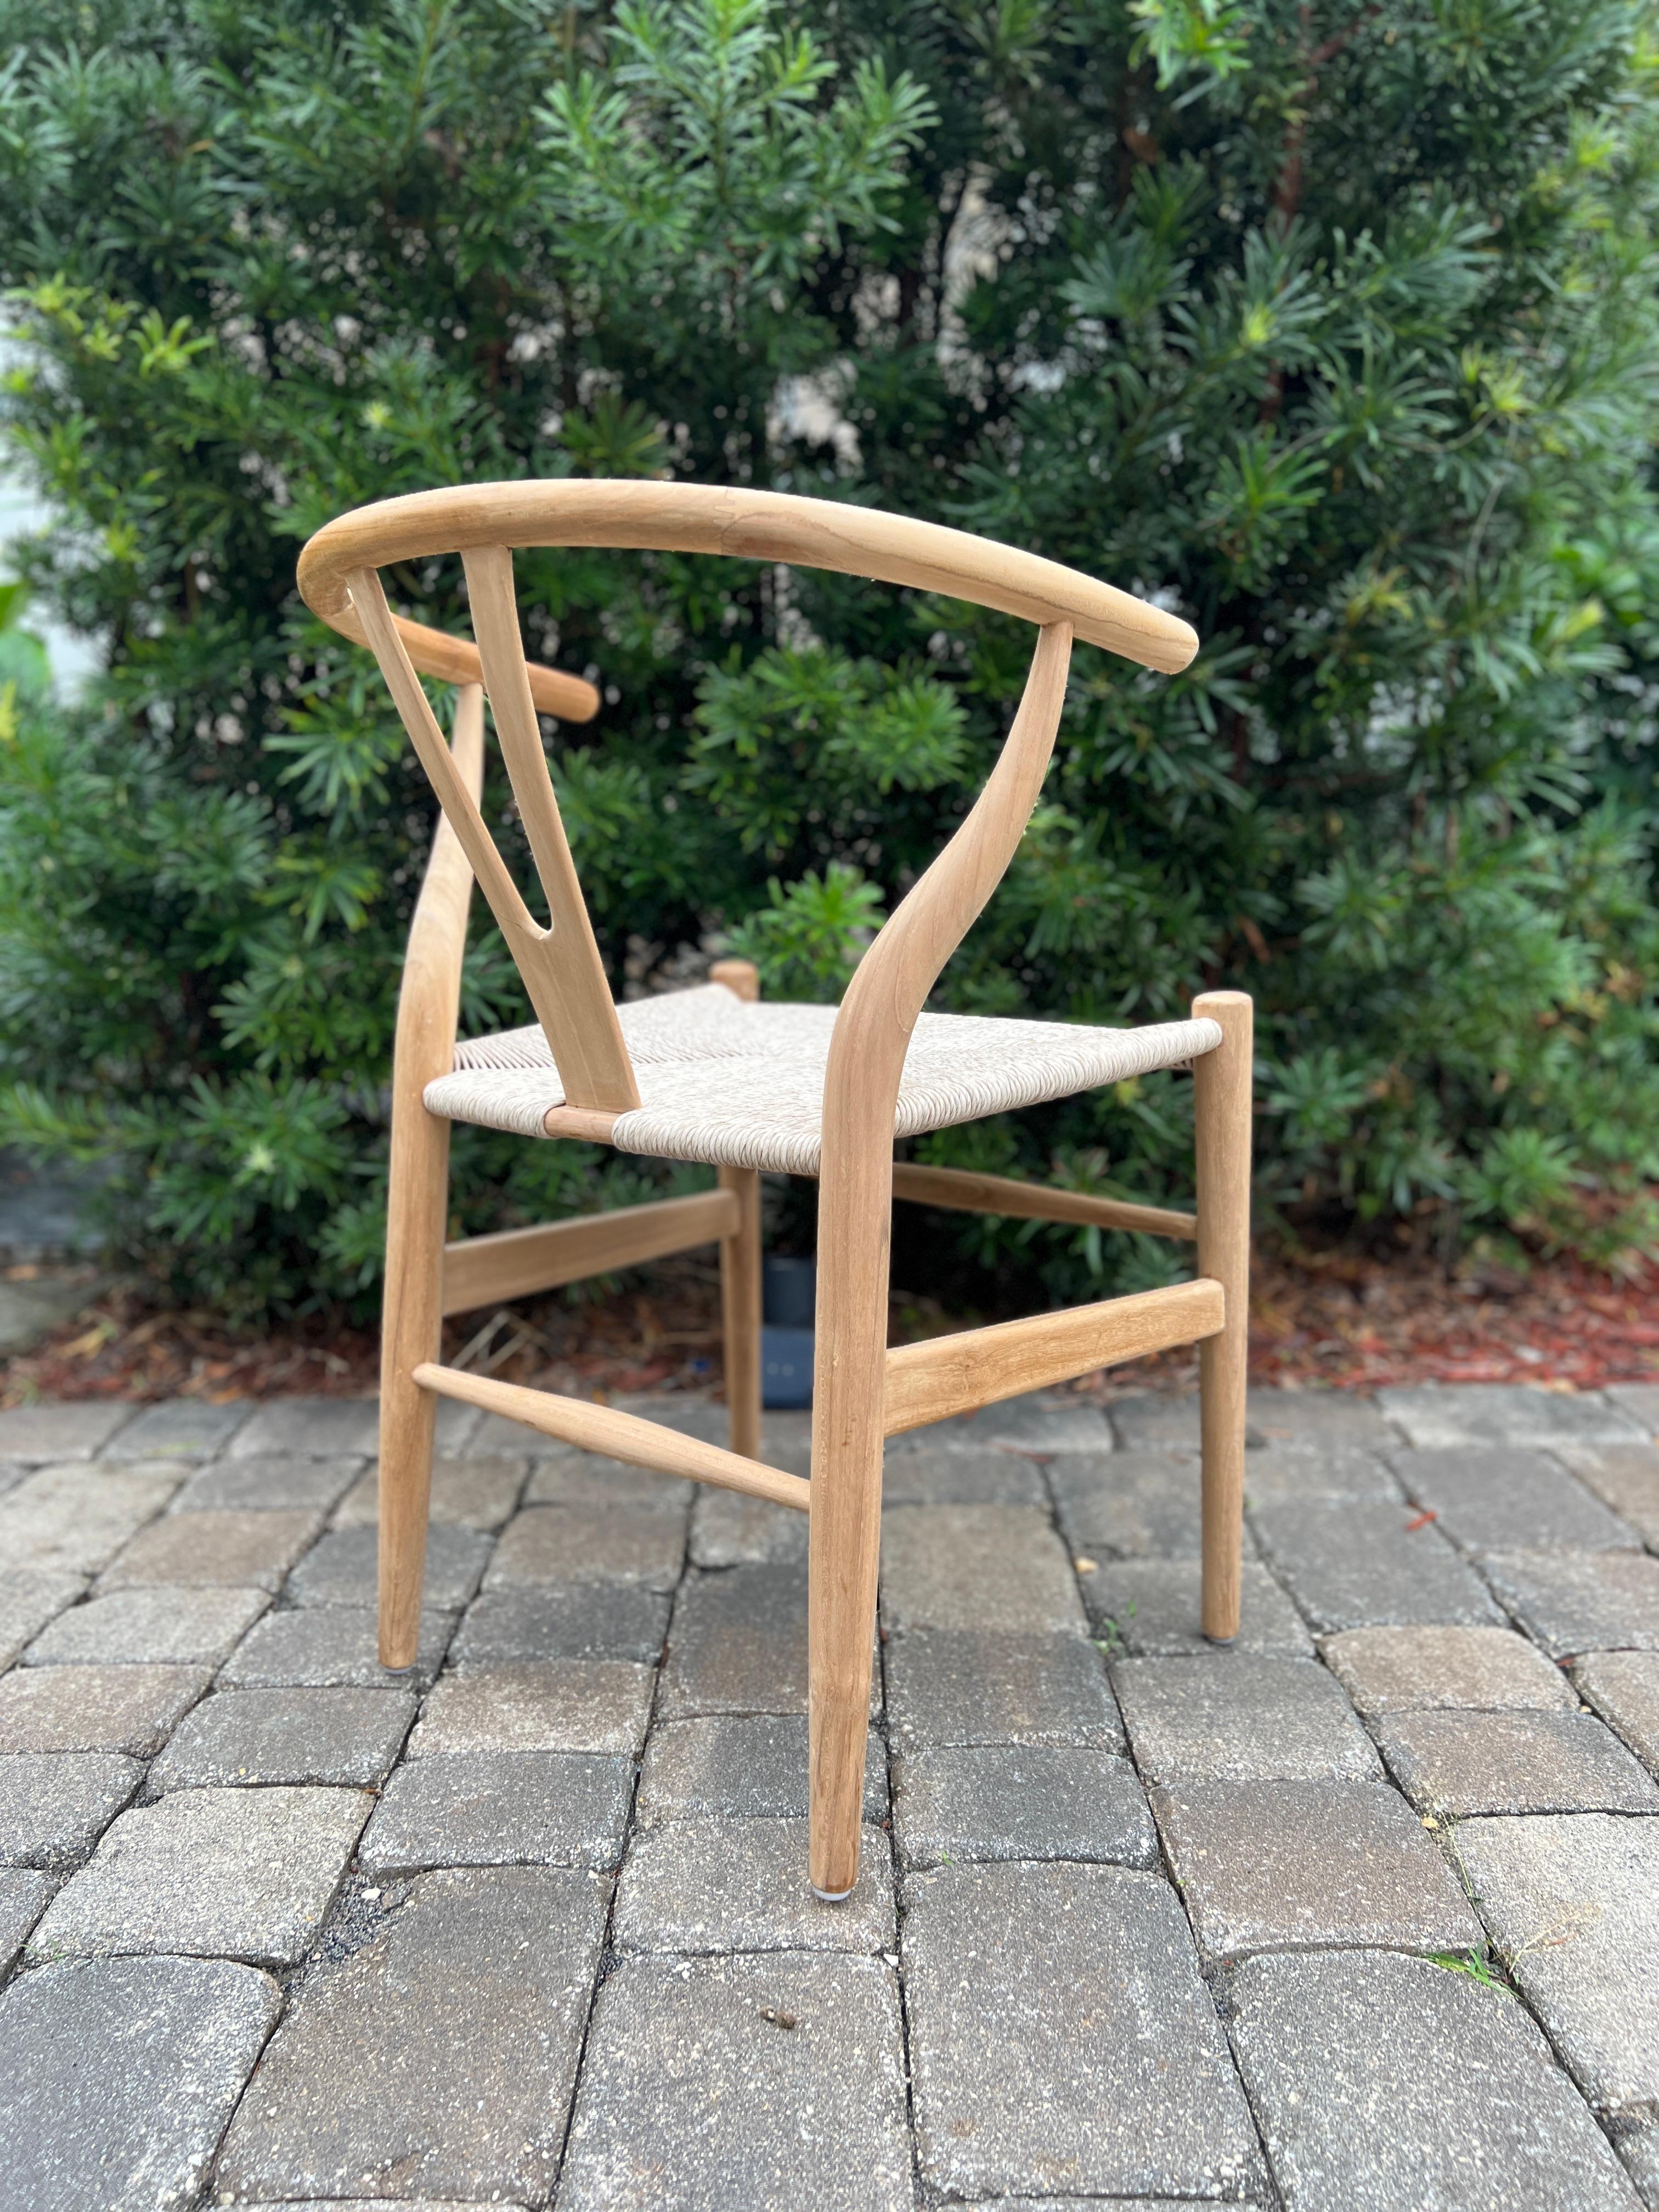 Hand-Crafted Pair of Mid-Century Modern Chairs in Natural Teak Wood with Woven Seats, Denmark